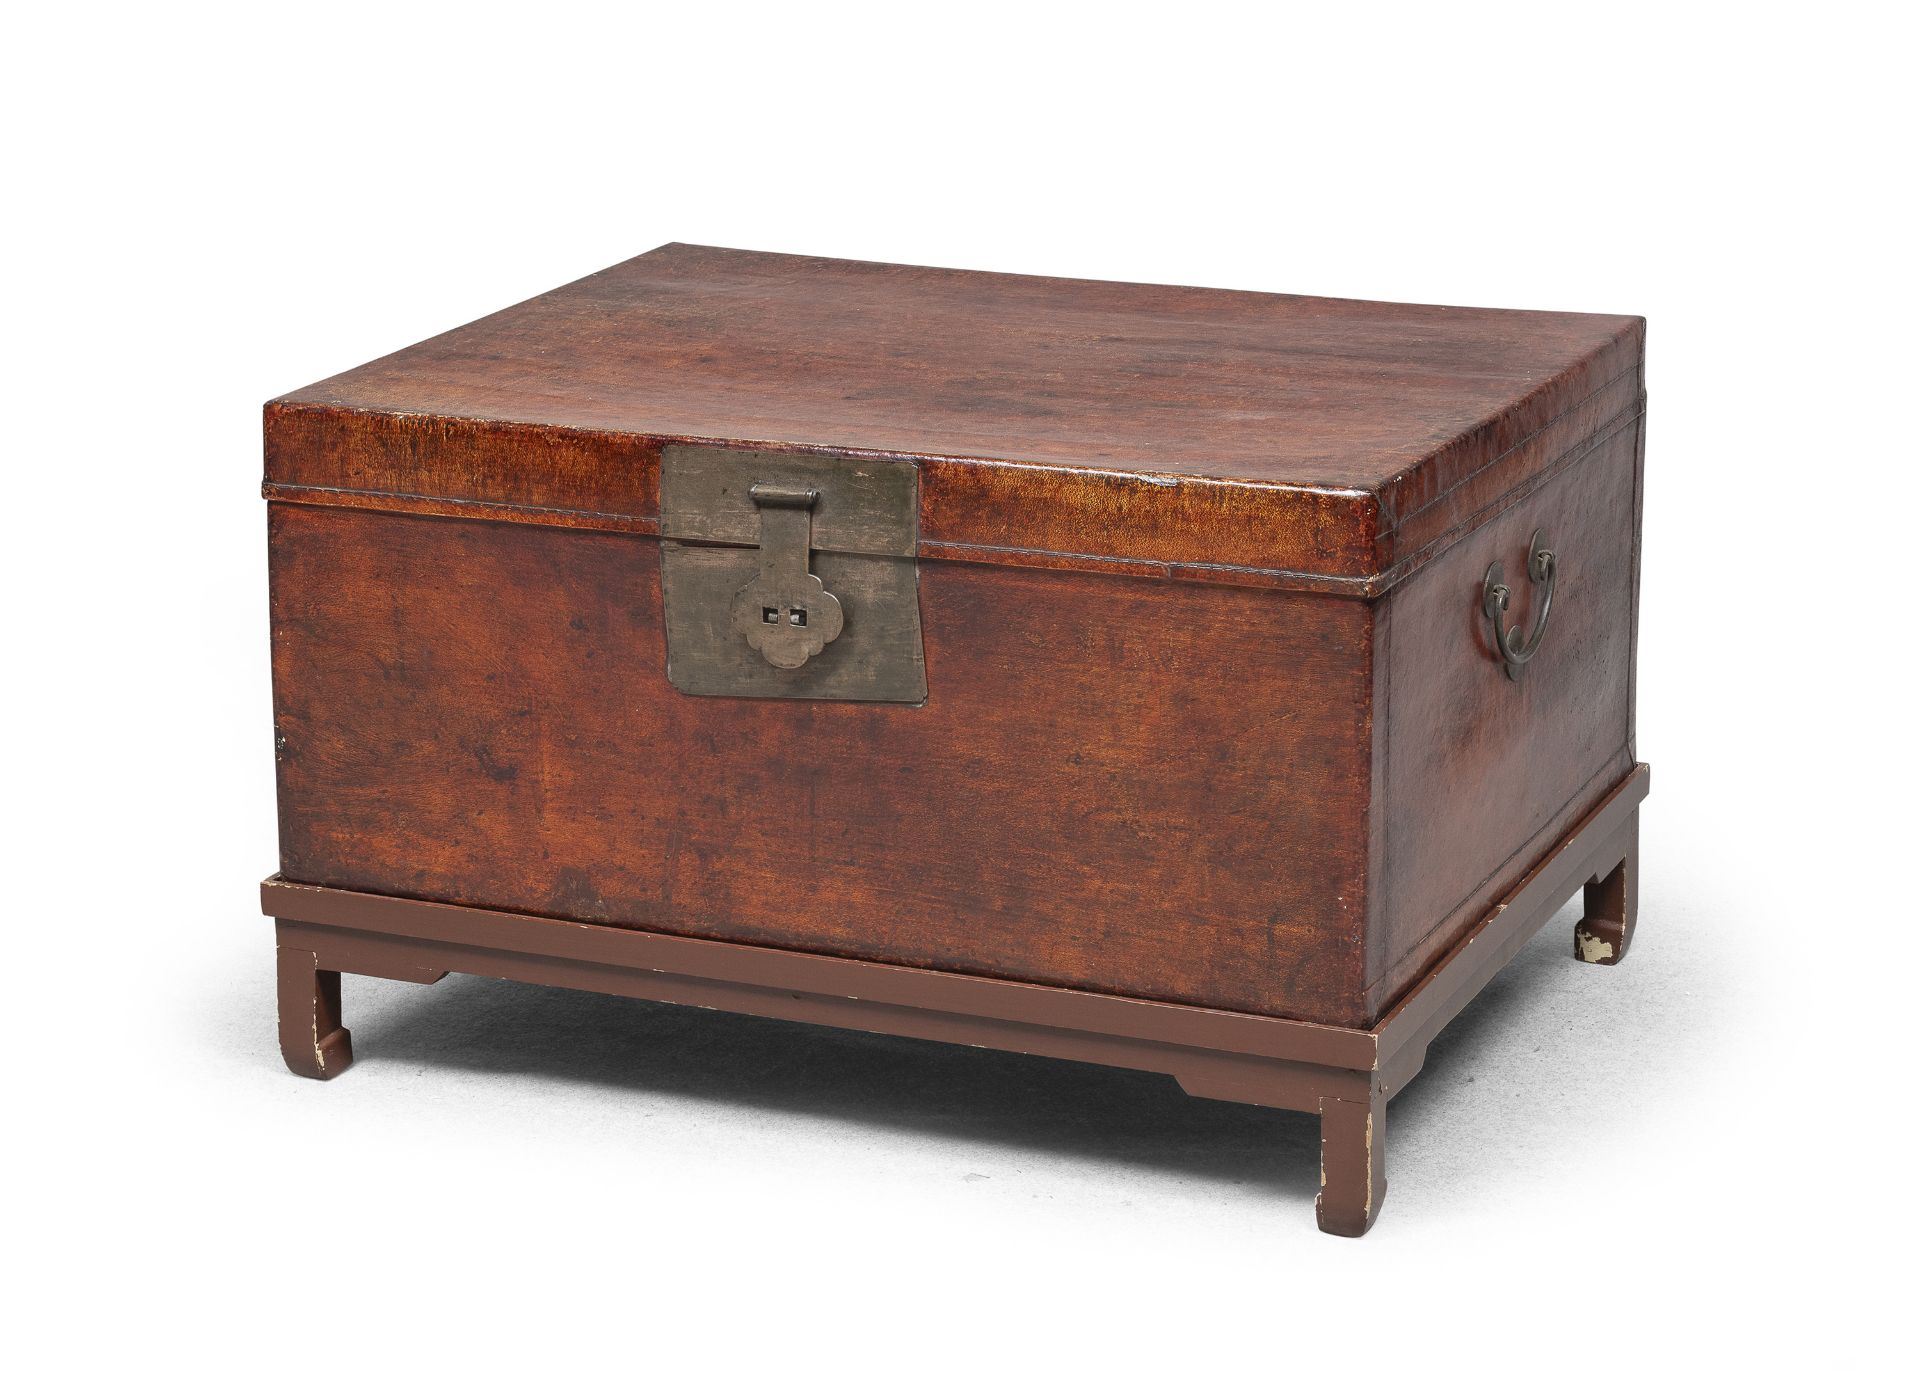 A CHINESE RED LAQUER WOOD TRUNK. END 19TH CENTURY.